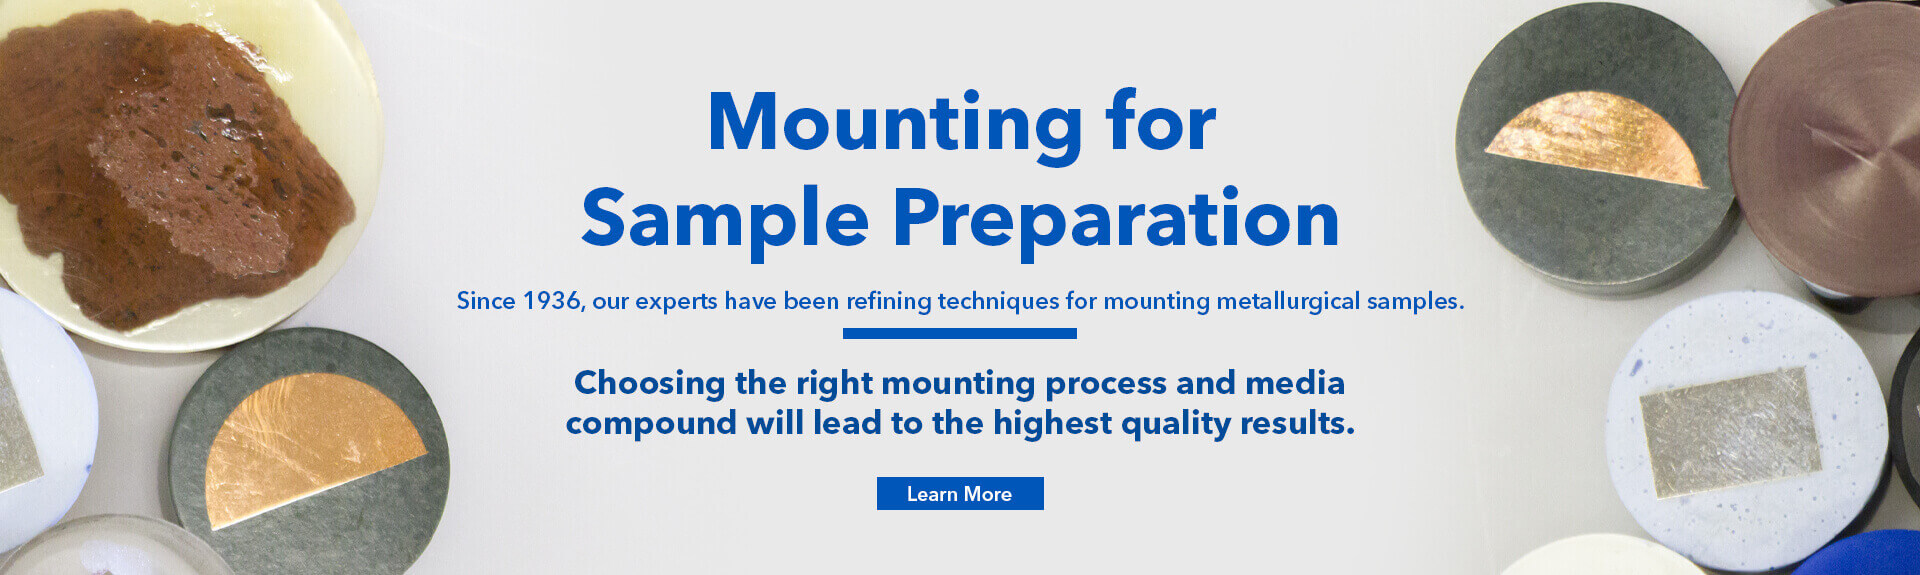 Mounting for Sample Preparation